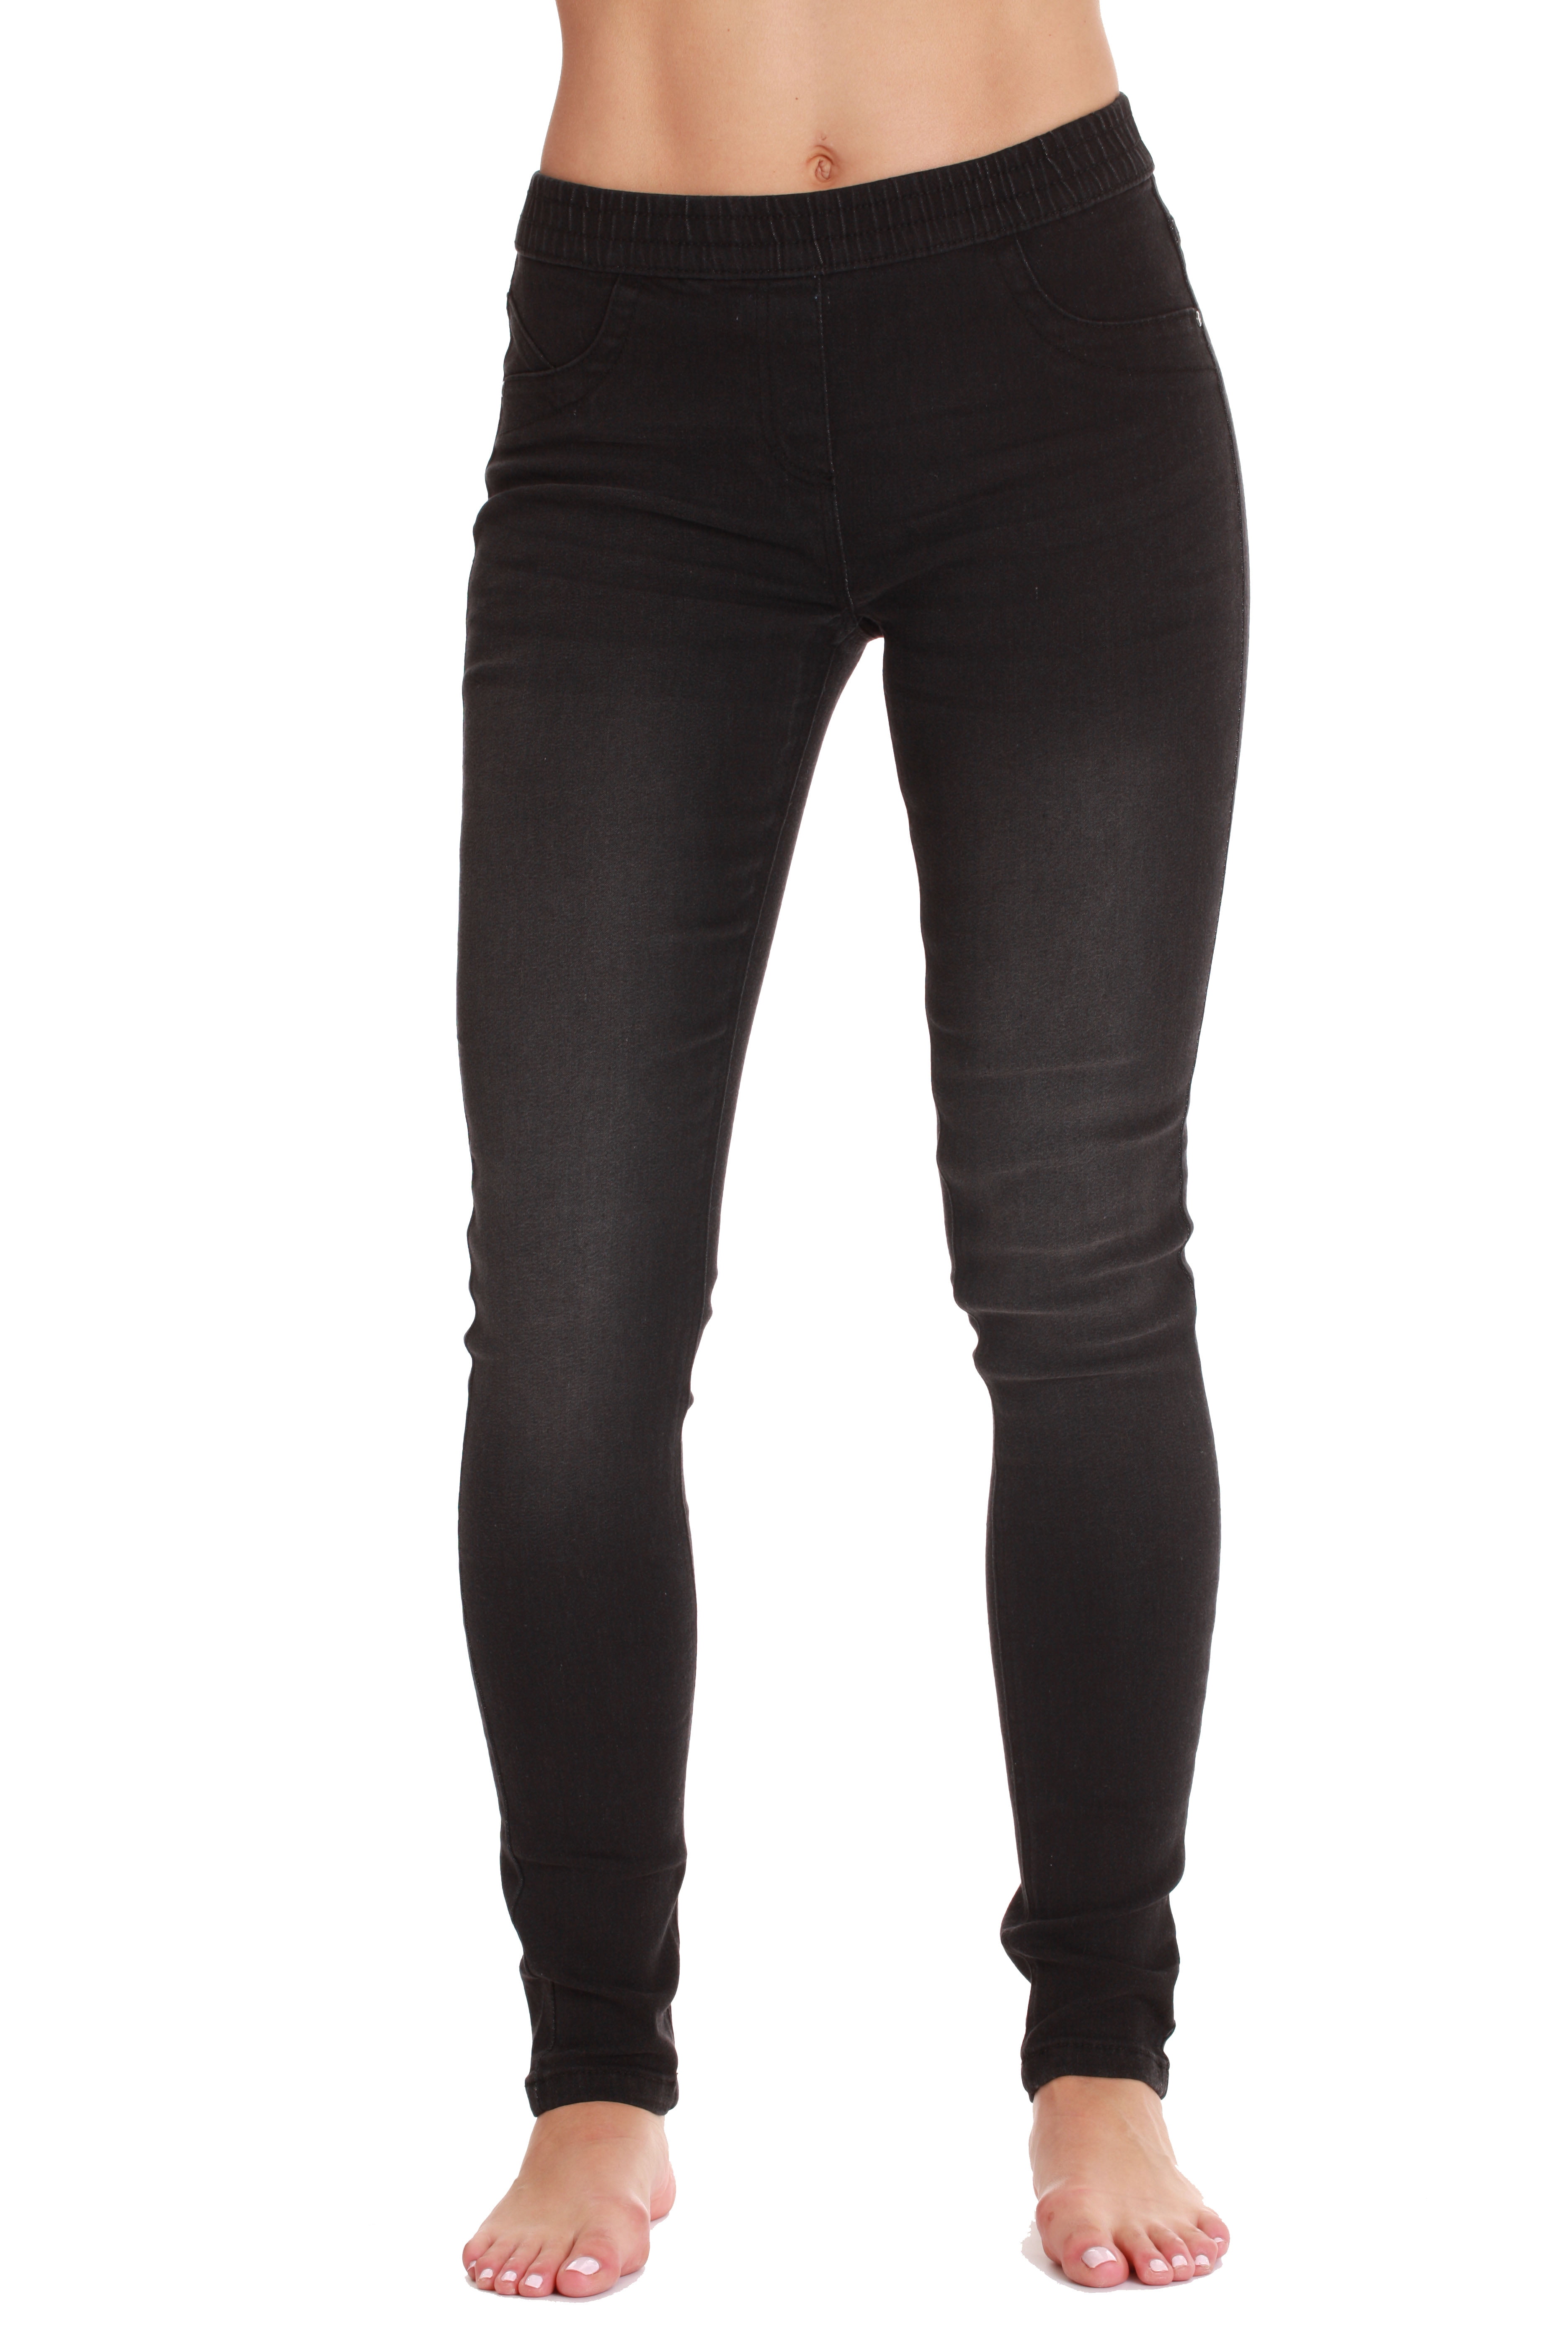 Buy Sizzers Women's Slim fit Jeggings, Jeans with Crystal Boat, Work high  Waist, Stretchable Black Pants with Pocket